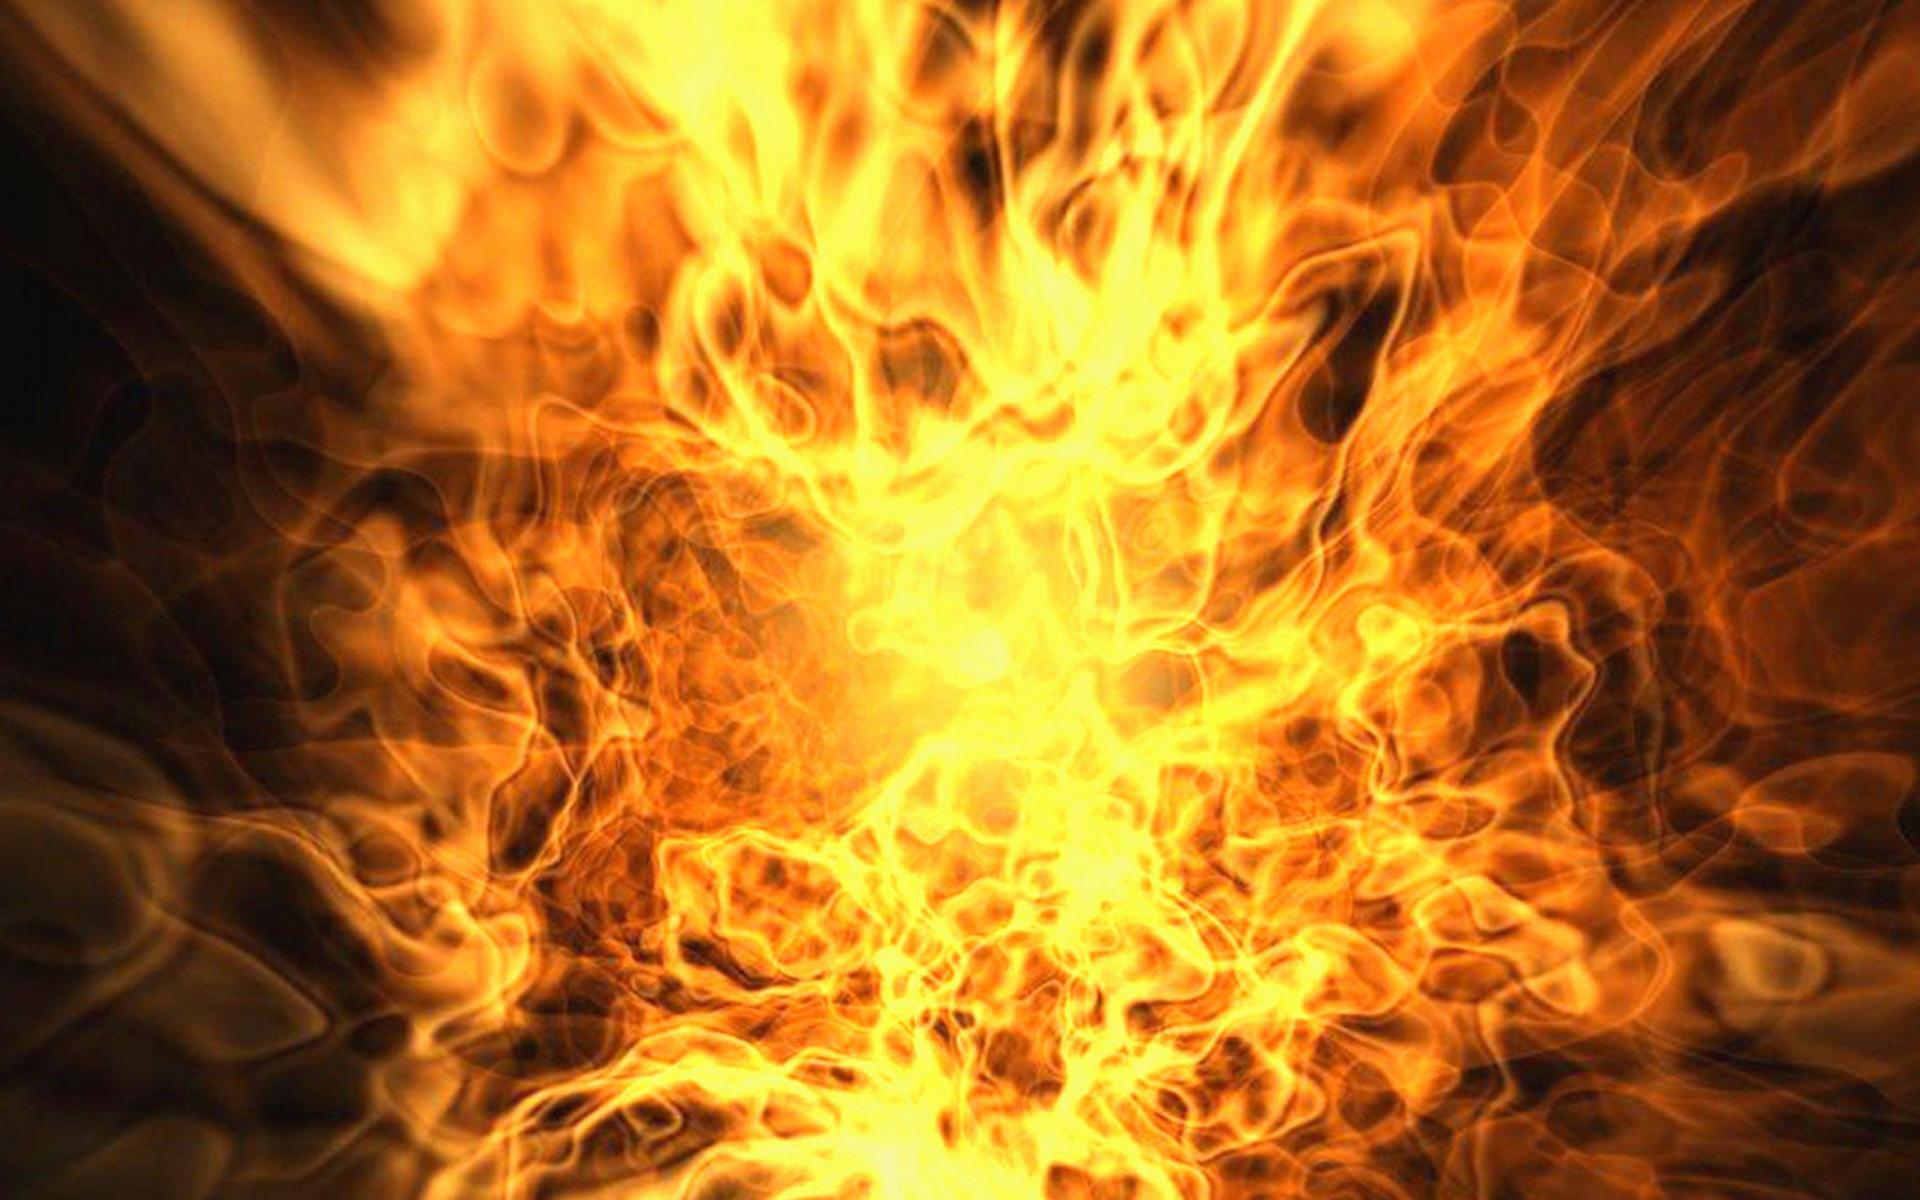 Fire Backgrounds for Desktop | Wallpapers, Backgrounds, Images ...